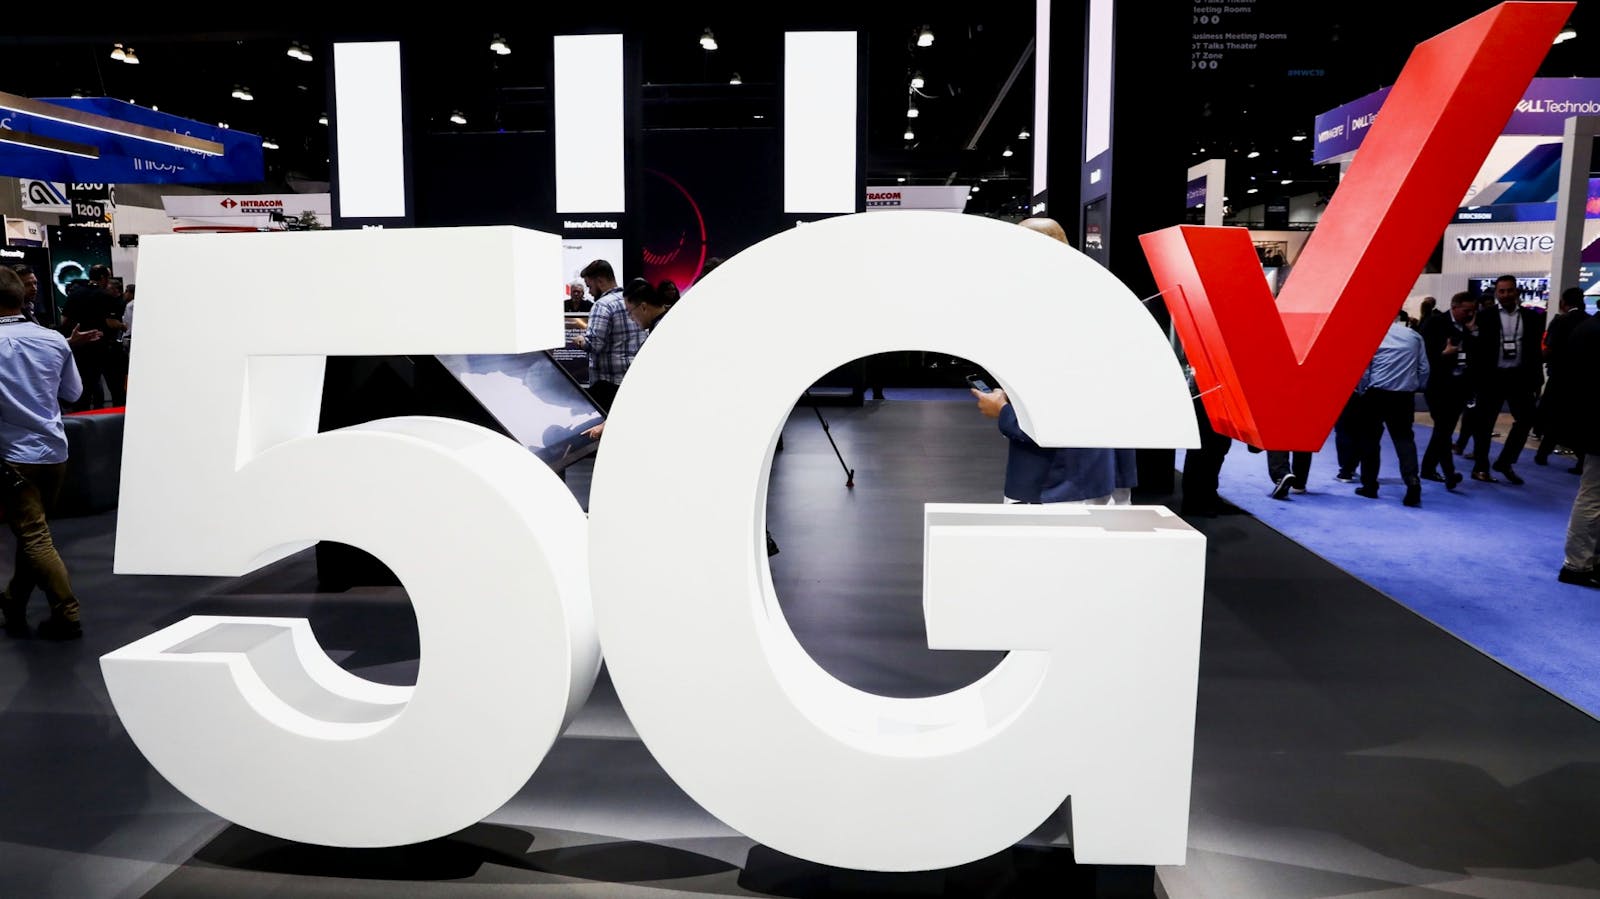 Verizon’s 5G wireless signage at the Mobile World Congress Americas event in Los Angeles in October. Photo: Bloomberg